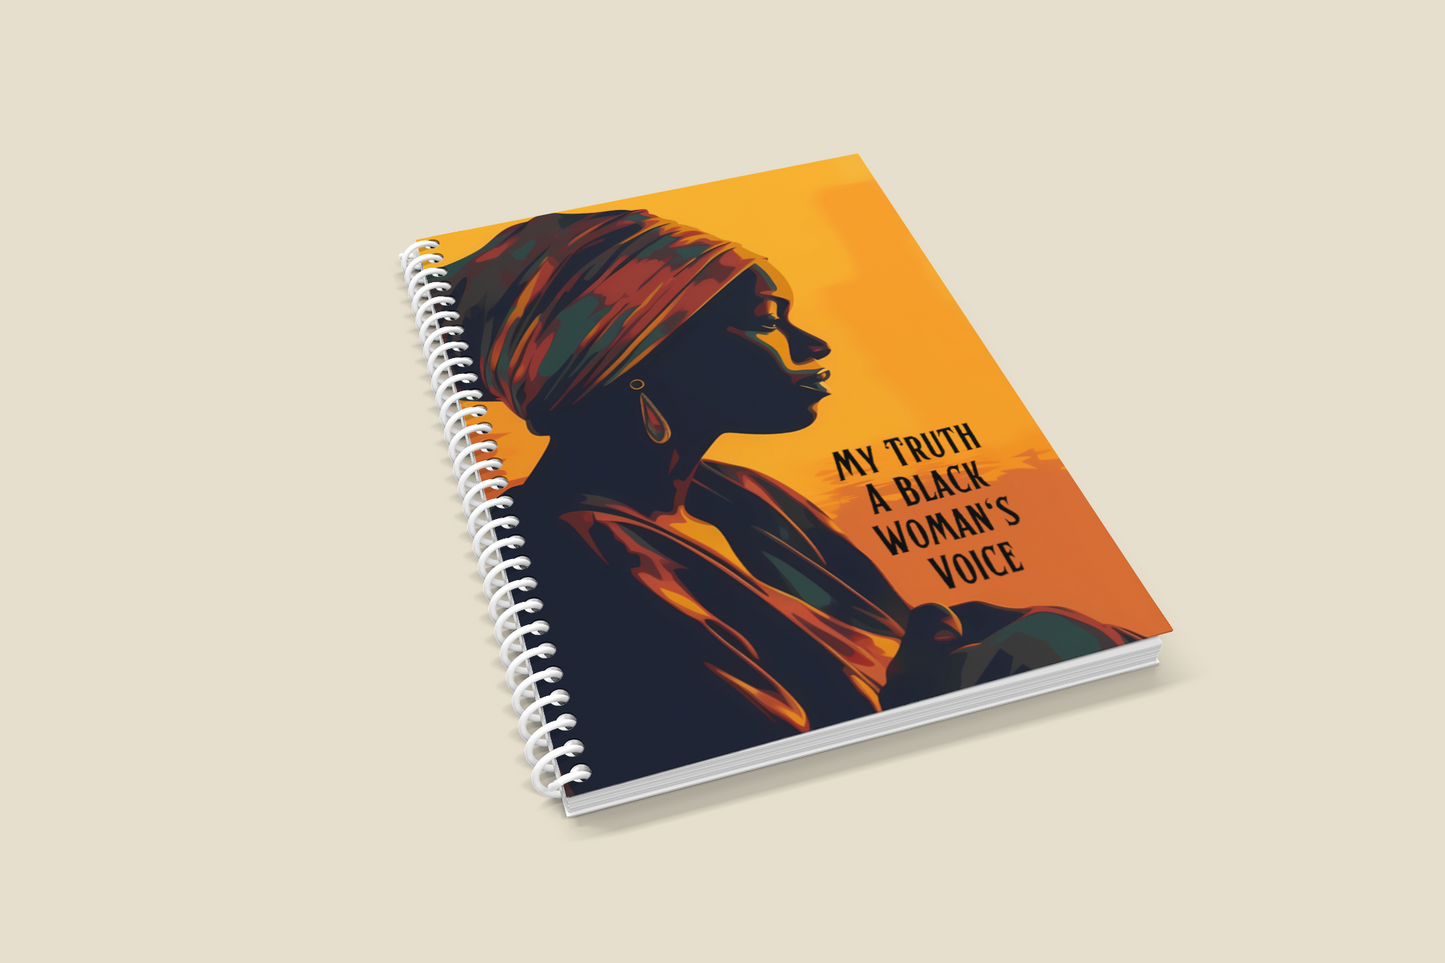 My Truth: A Black Woman's Voice Journal